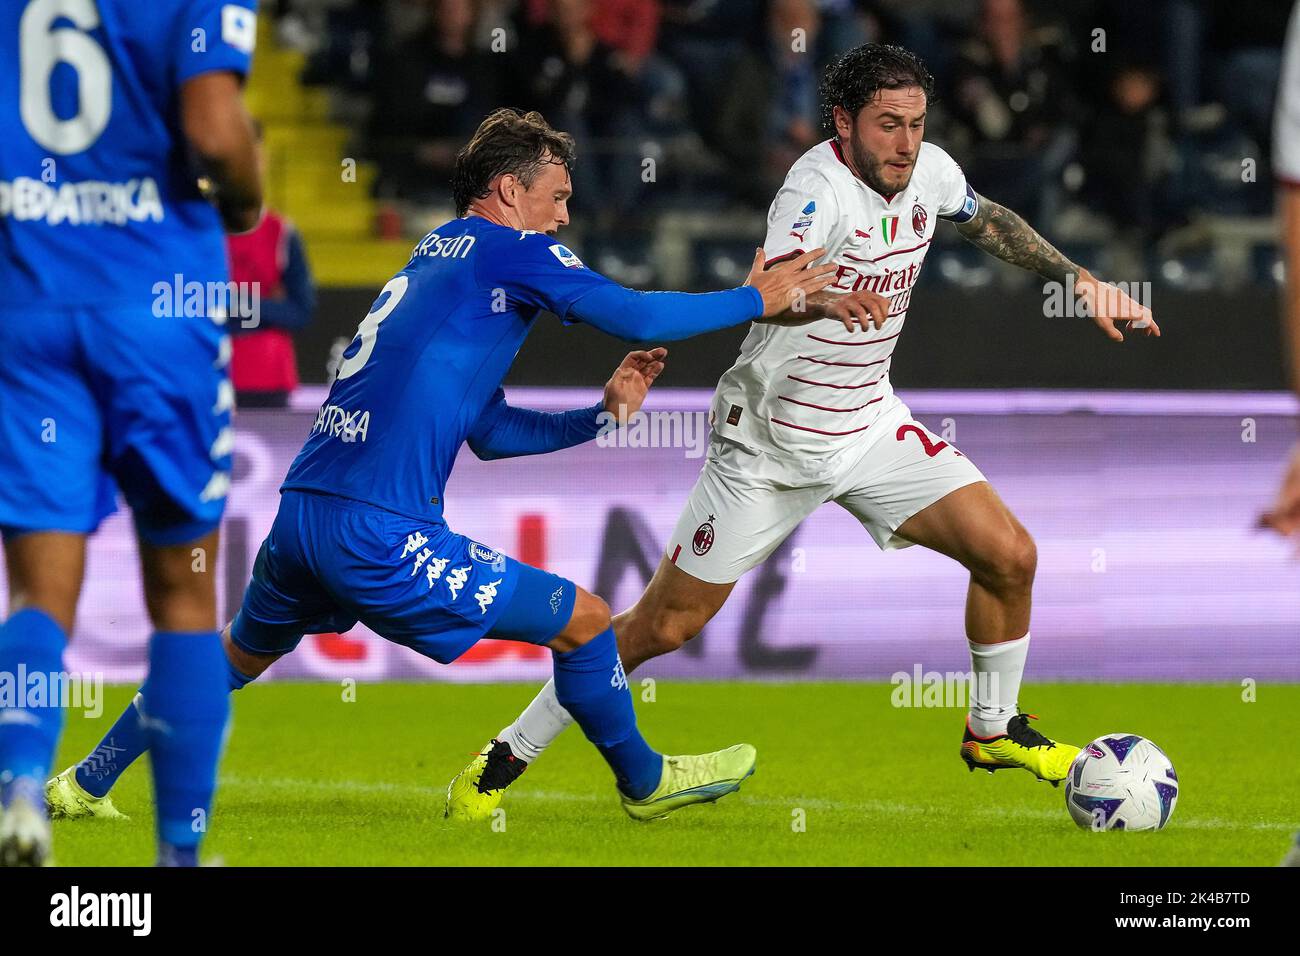 Empoli, Italy. 01st Oct, 2022. Liam Henderson of Empoli FC and Davide Calabria of AC Milan compete for the ball during the Serie A football match between Empoli FC and AC Milan at Carlo Castellani stadium in Empoli (Italy), October 1st, 2022. Photo Paolo Nucci/Insidefoto Credit: Insidefoto di andrea staccioli/Alamy Live News Stock Photo